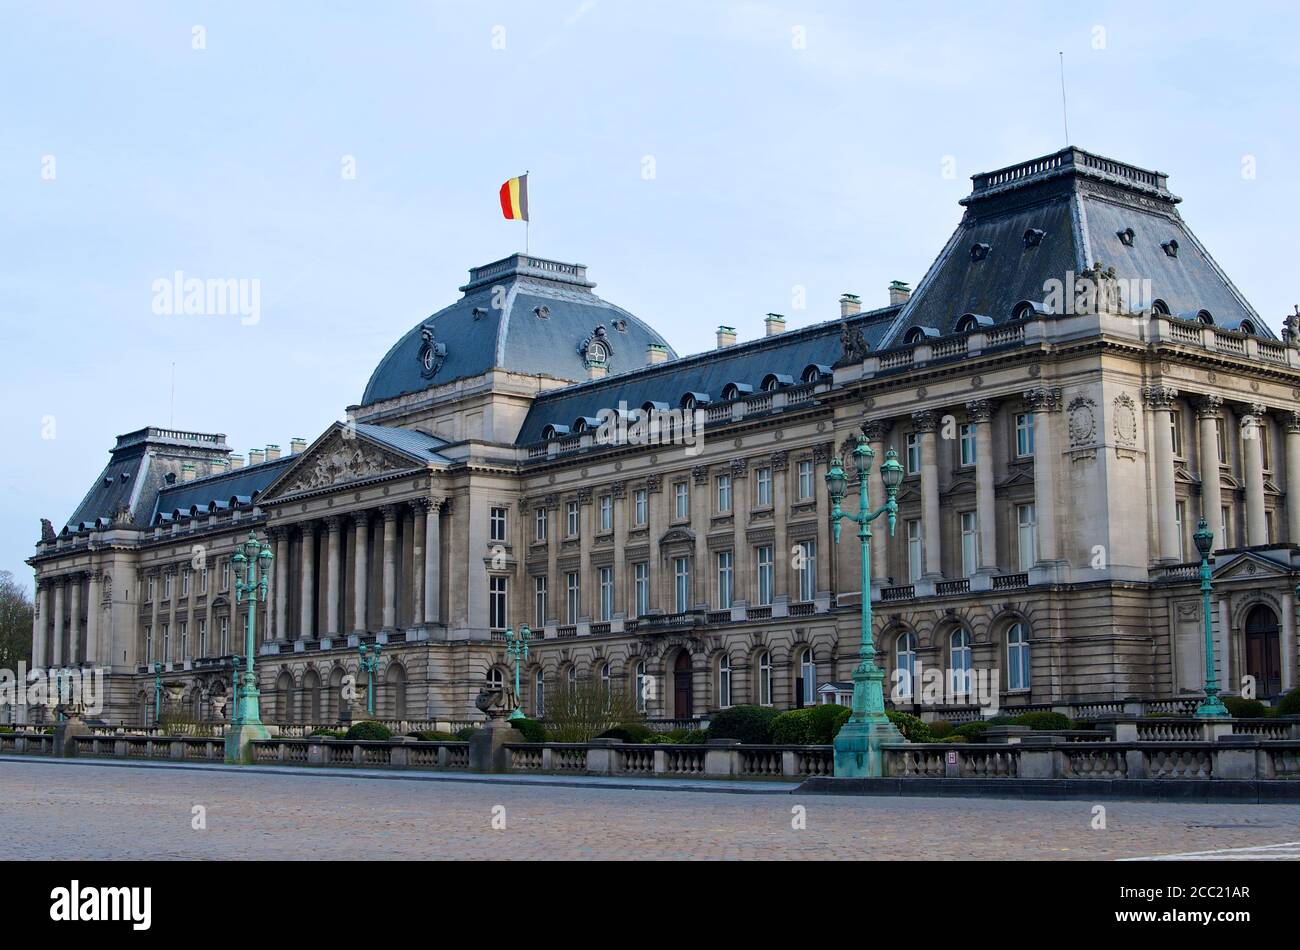 Belgium, Brussels, View of Royal Palace of Brussels Stock Photo